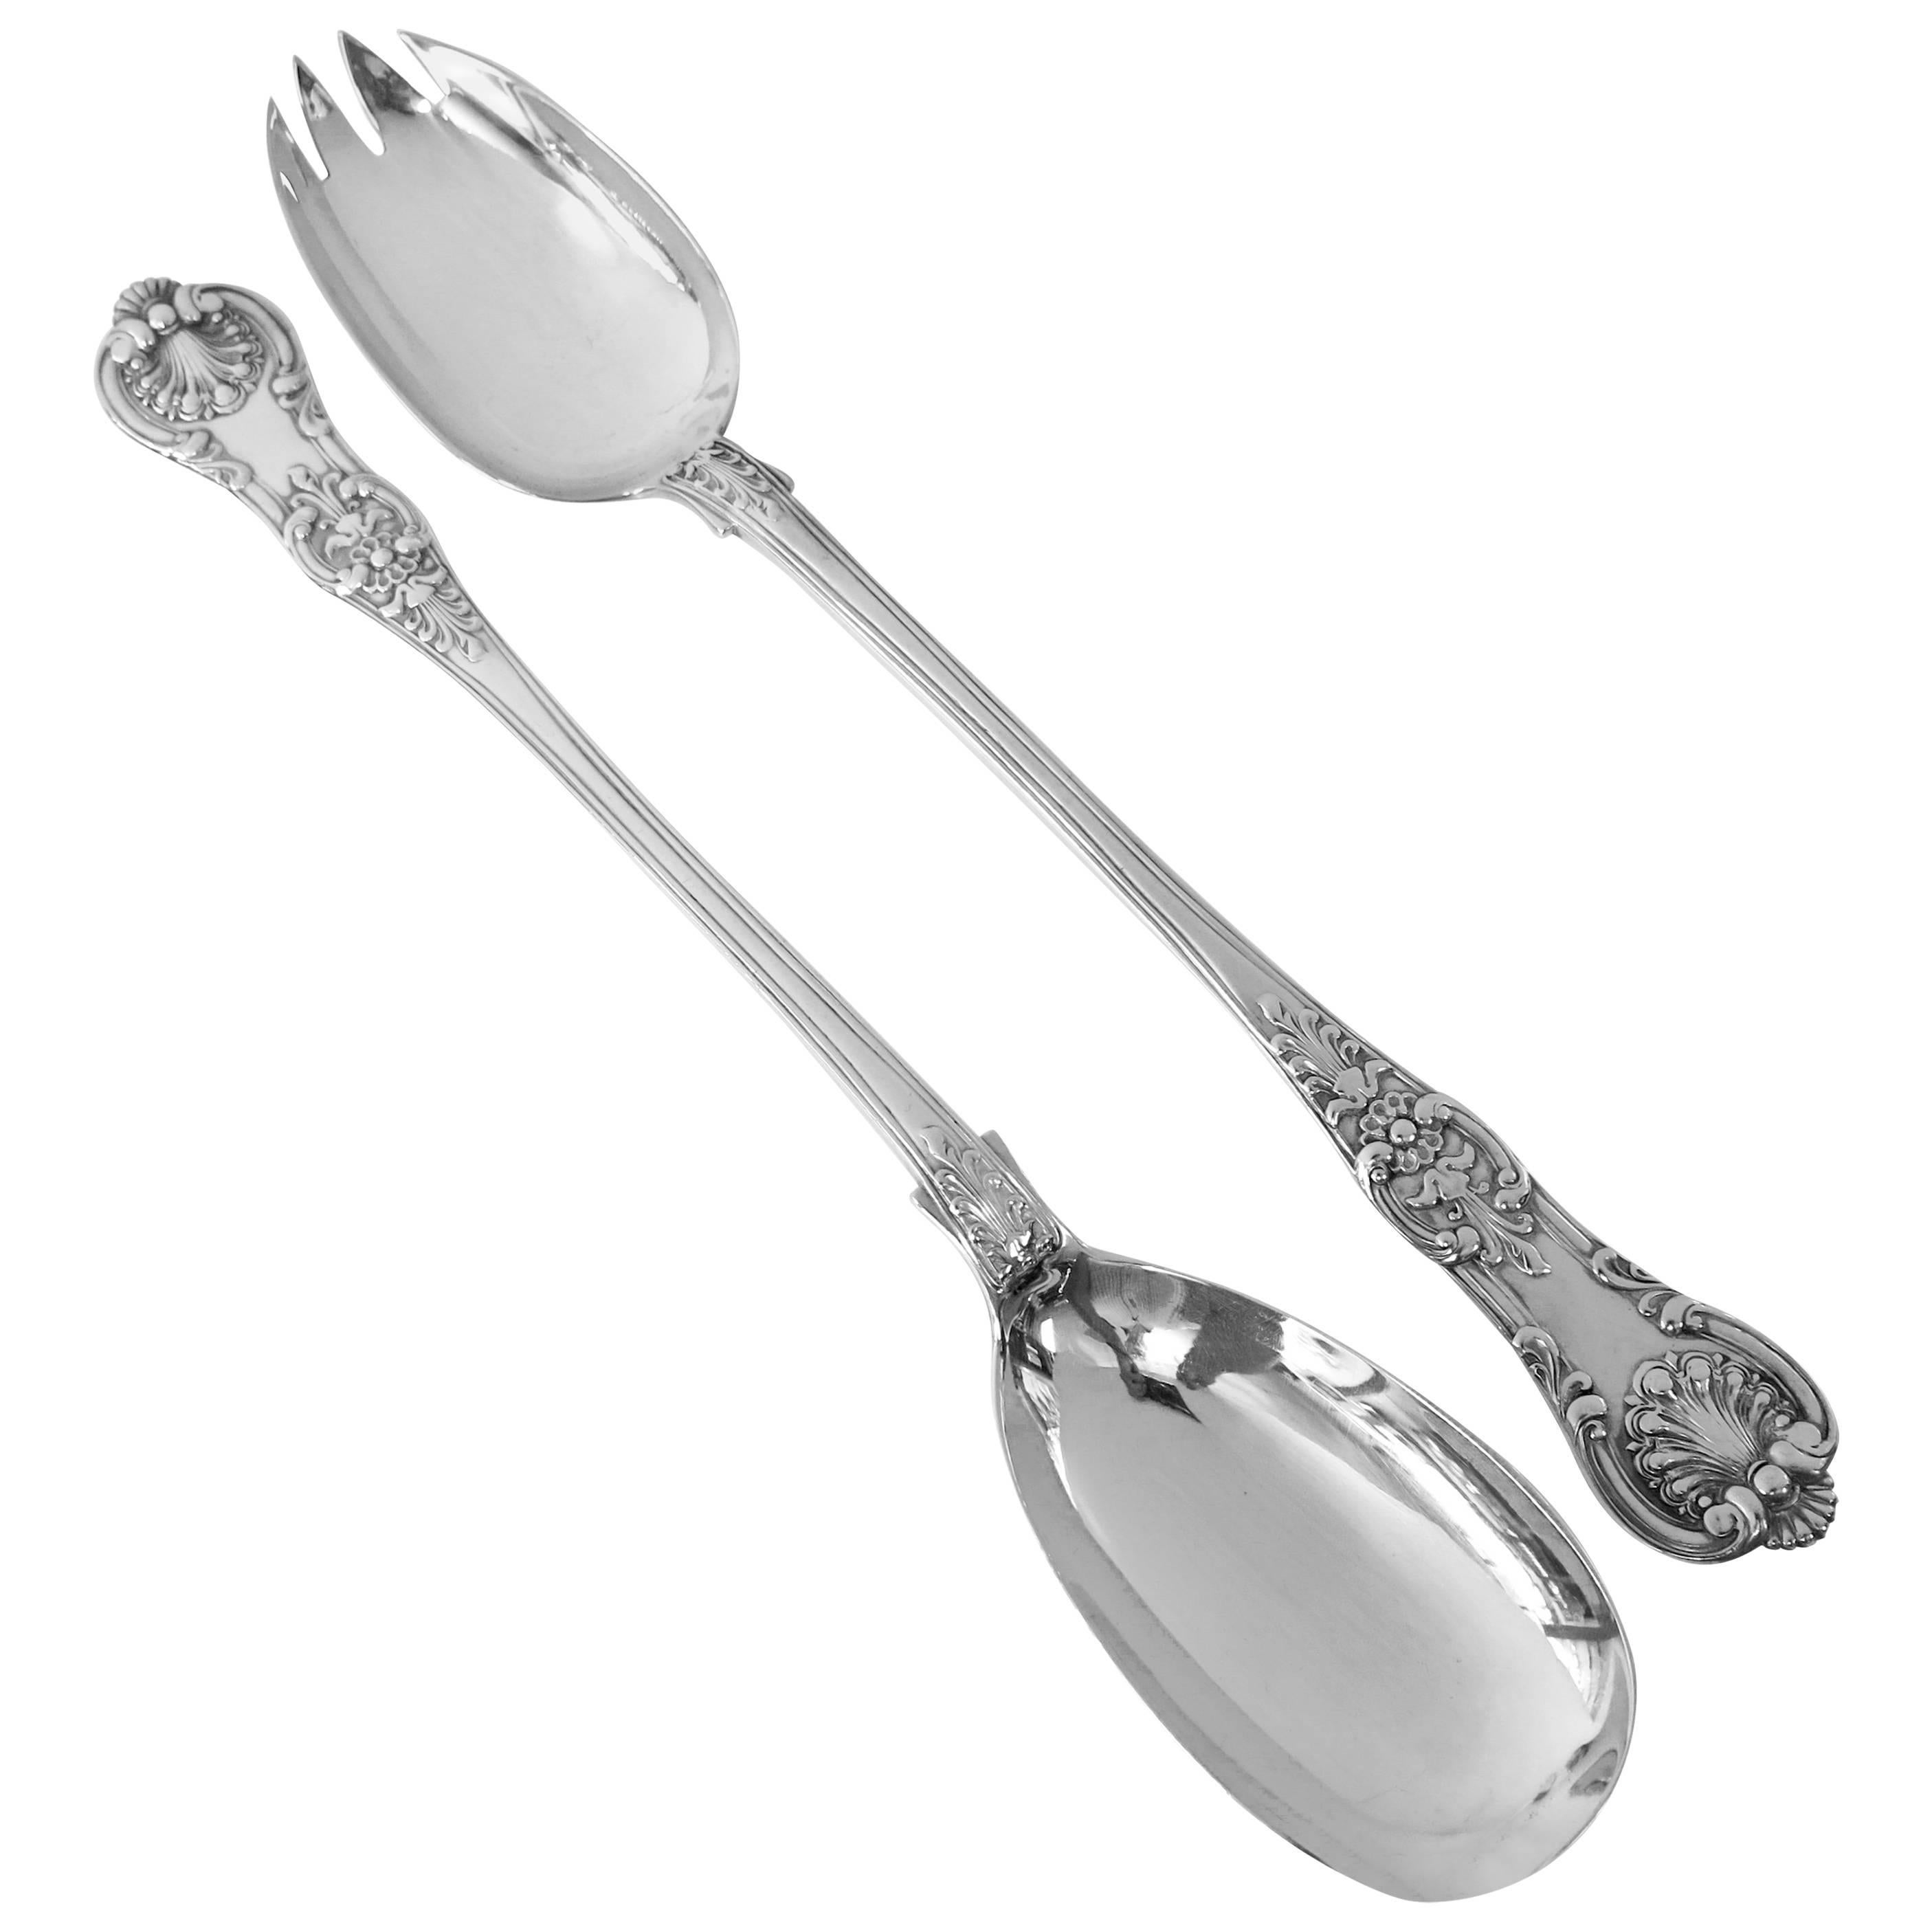 Antique English, Sterling Silver, Queens Pattern Salad Servers, 'English Kings'